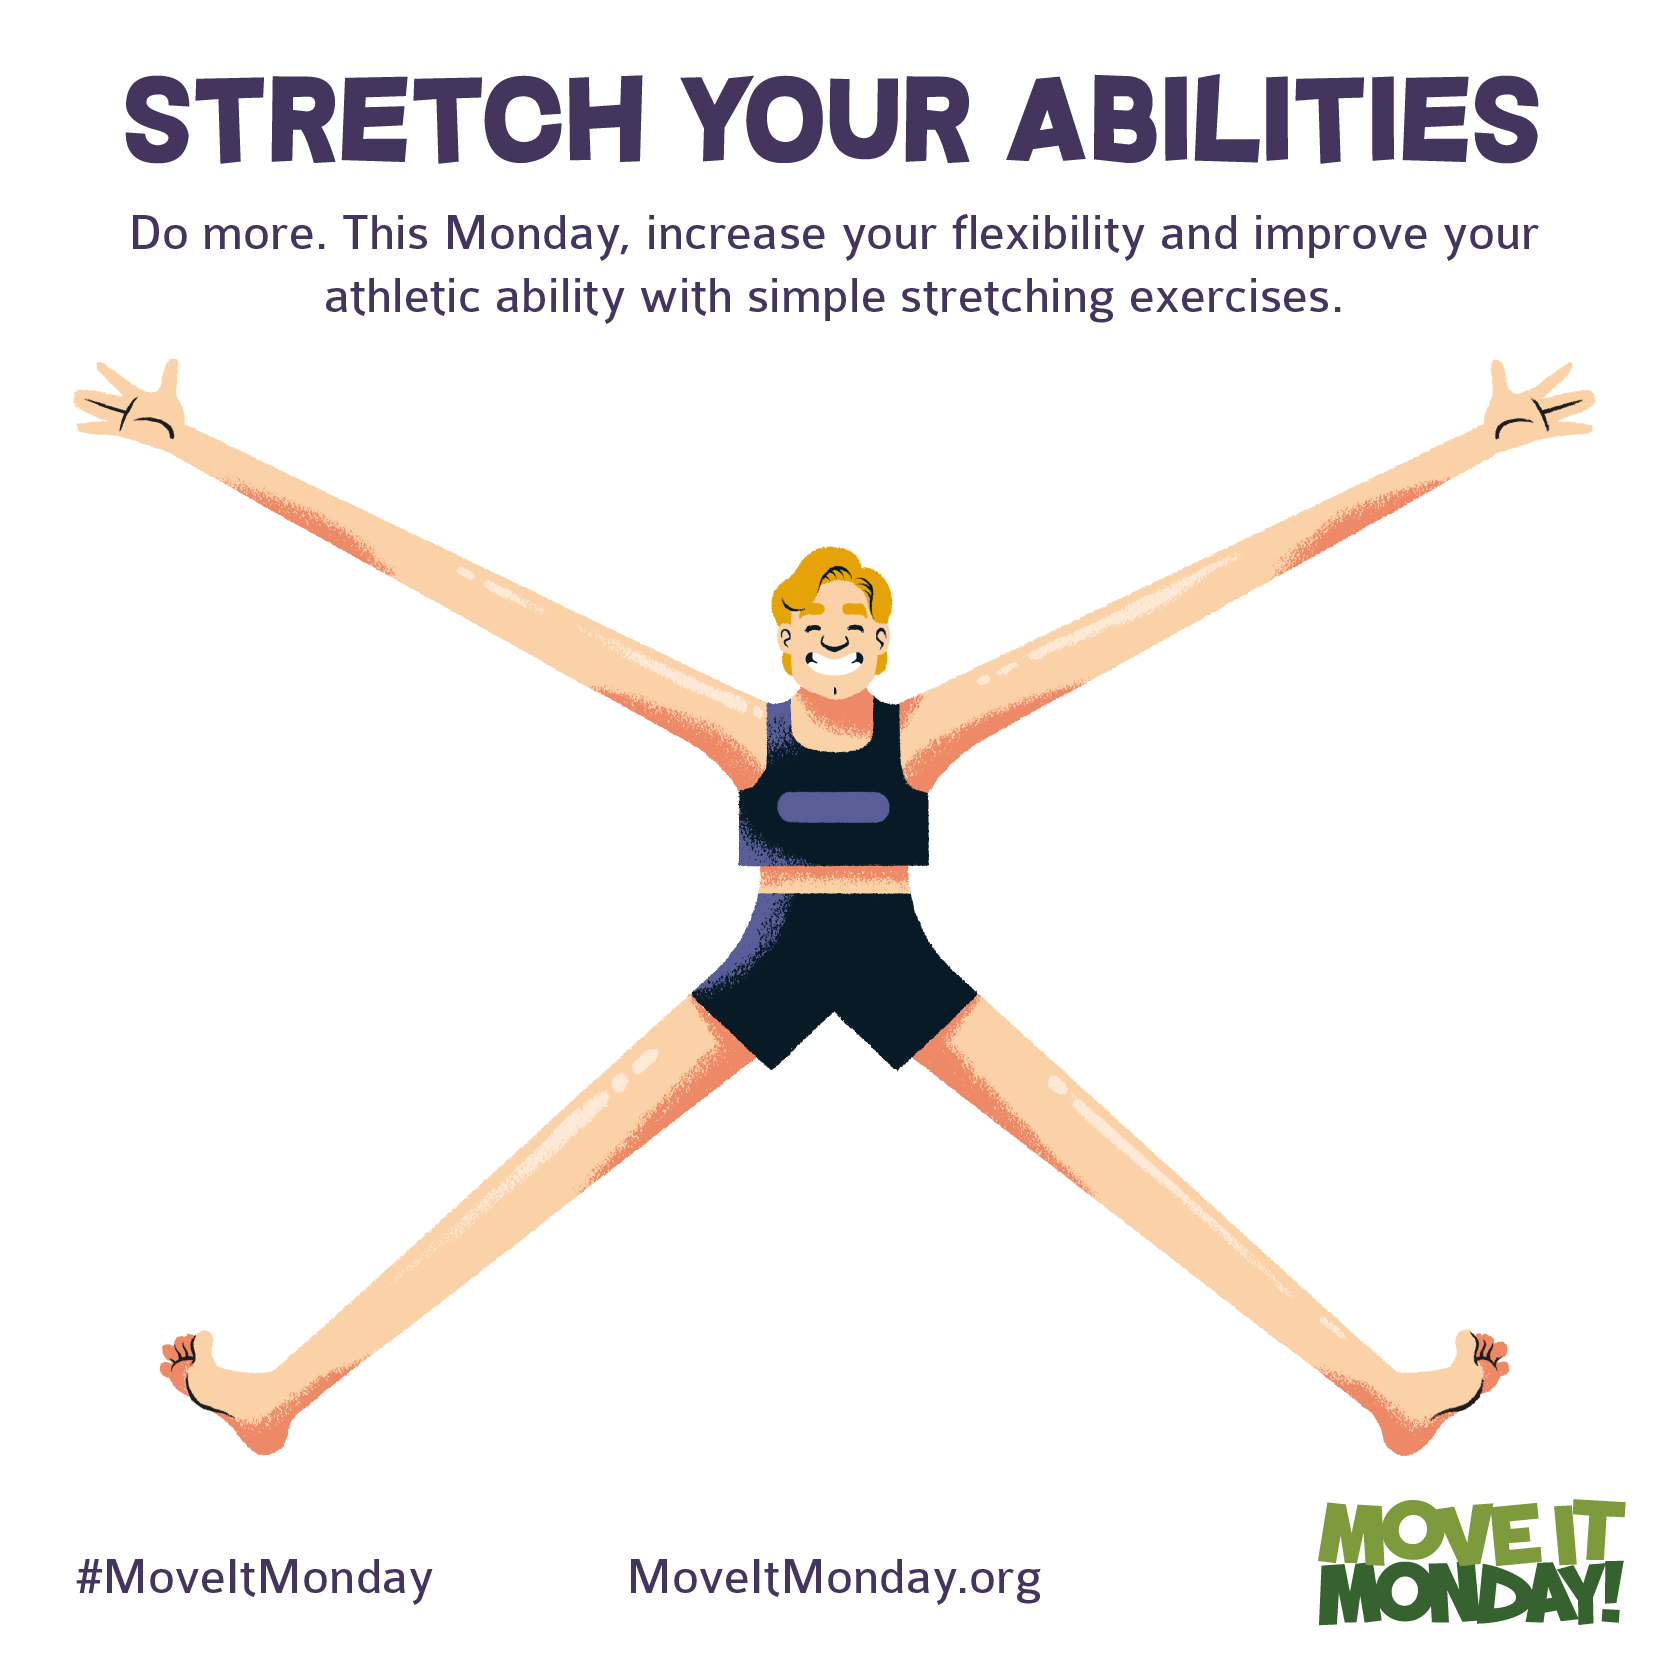 https://www.mondaycampaigns.org/wp-content/uploads/2020/03/Move-it-Monday-tip-Stretching-6-25-2018.png